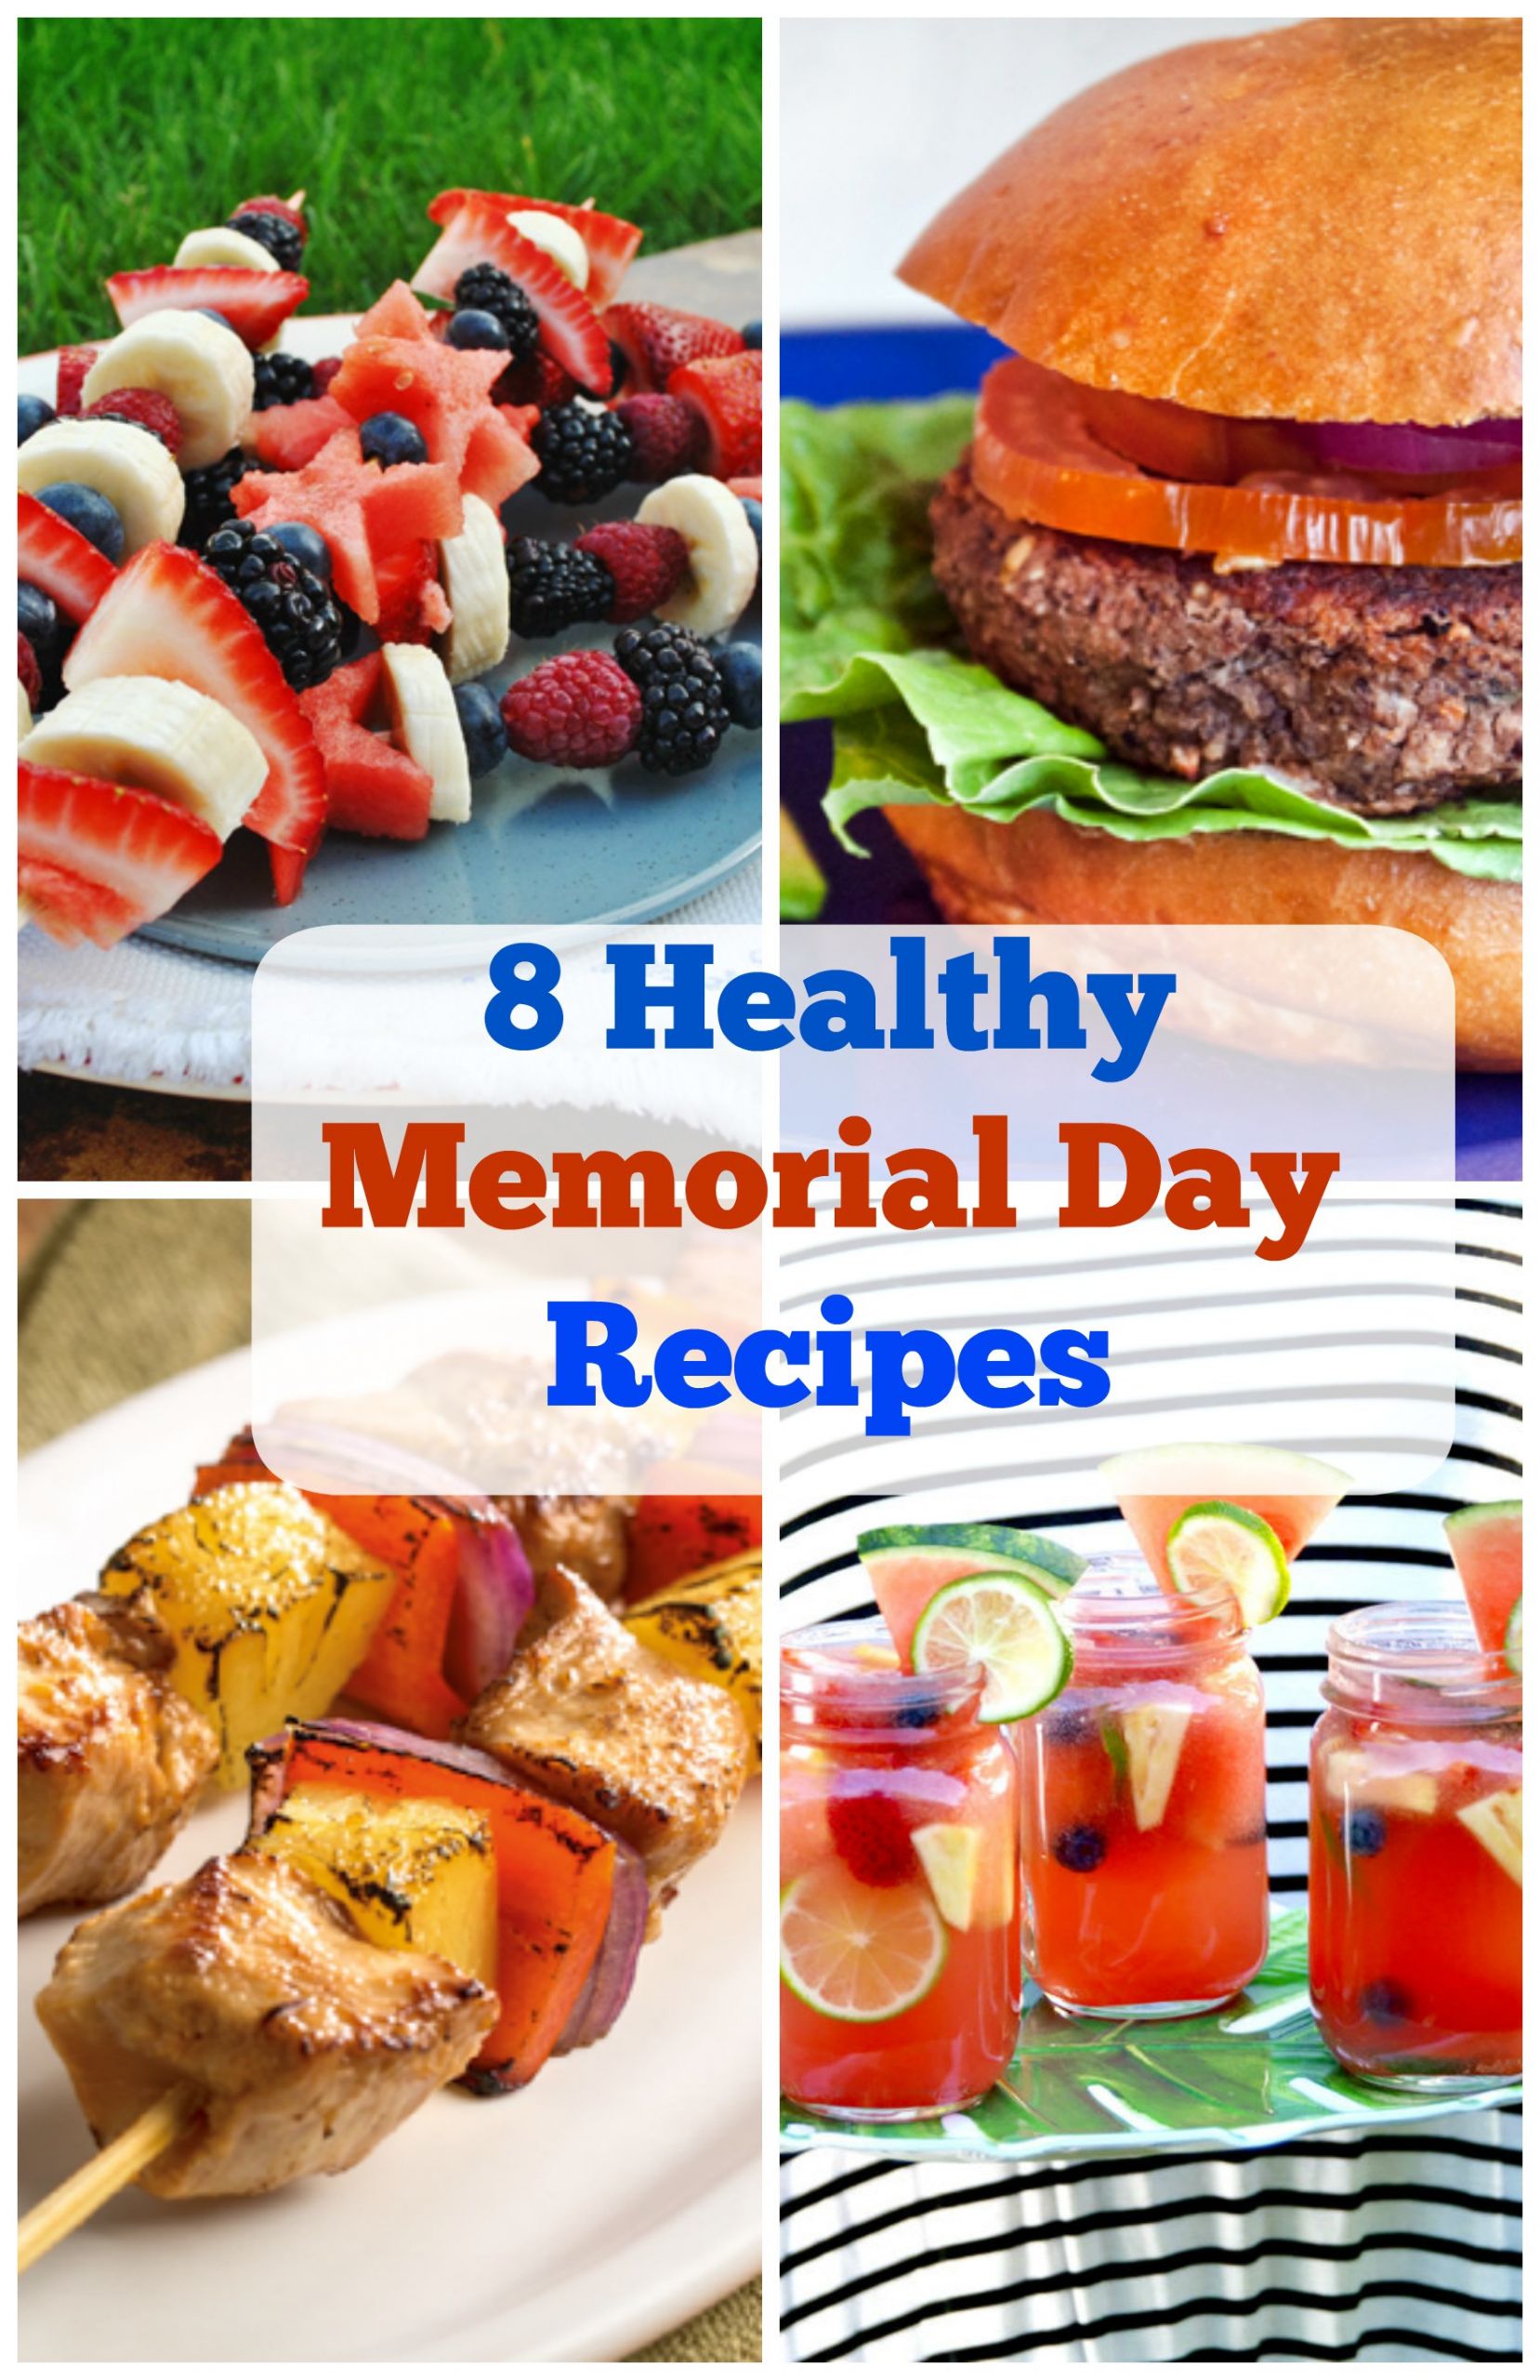 Memorial Day Food Recipes
 Healthy Memorial Day Recipes Focused on Fitness